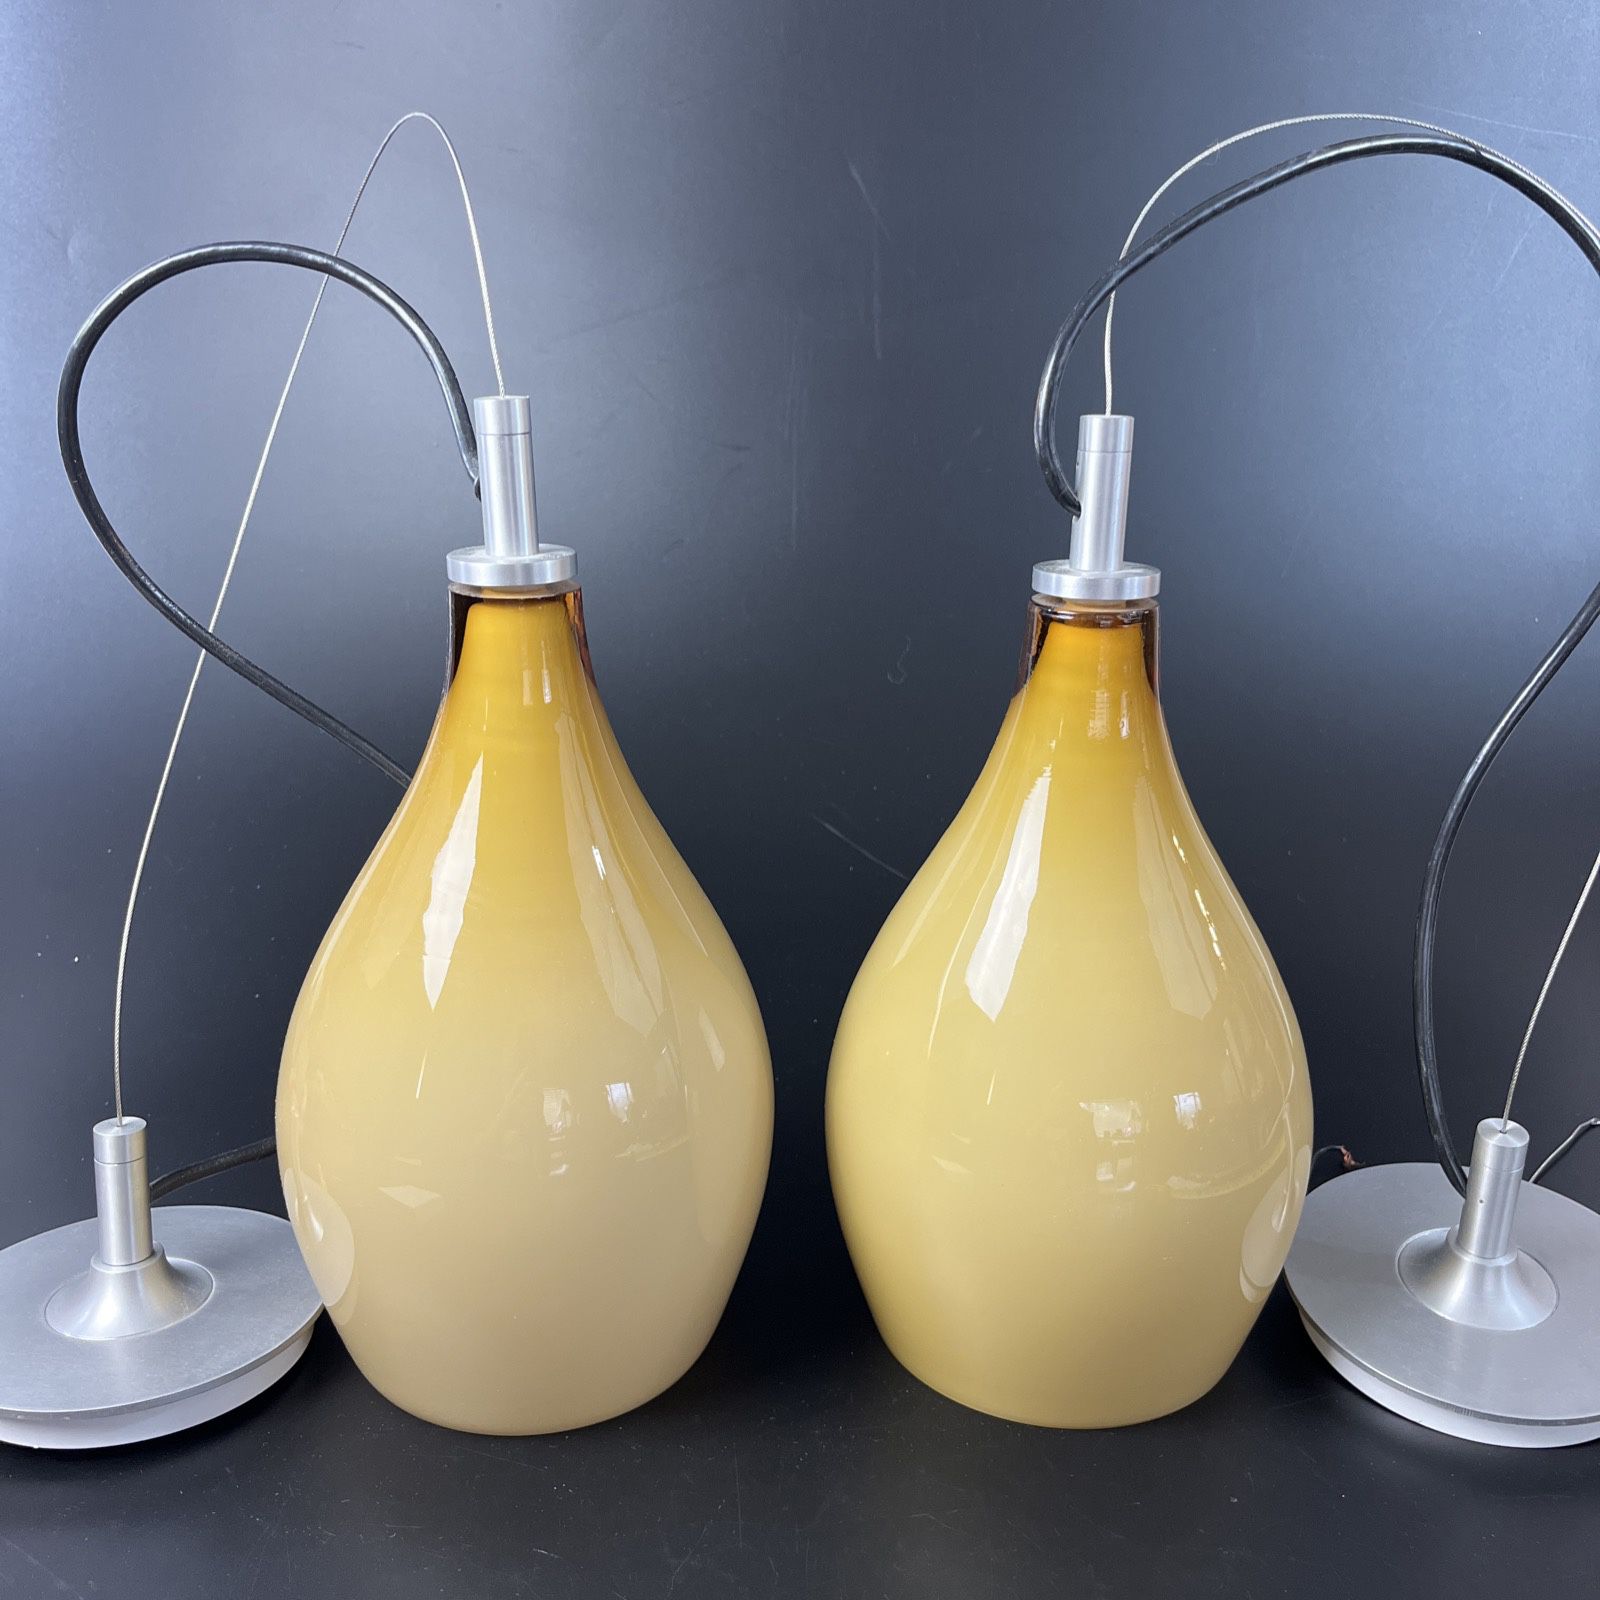  Set of 2 Vintage Resolute Hand Blown Glass Pendant Ceiling Lights Yellow/Beige  Cords are about 23-24" - Shades Measure about 5" X 10"  No Chips or c